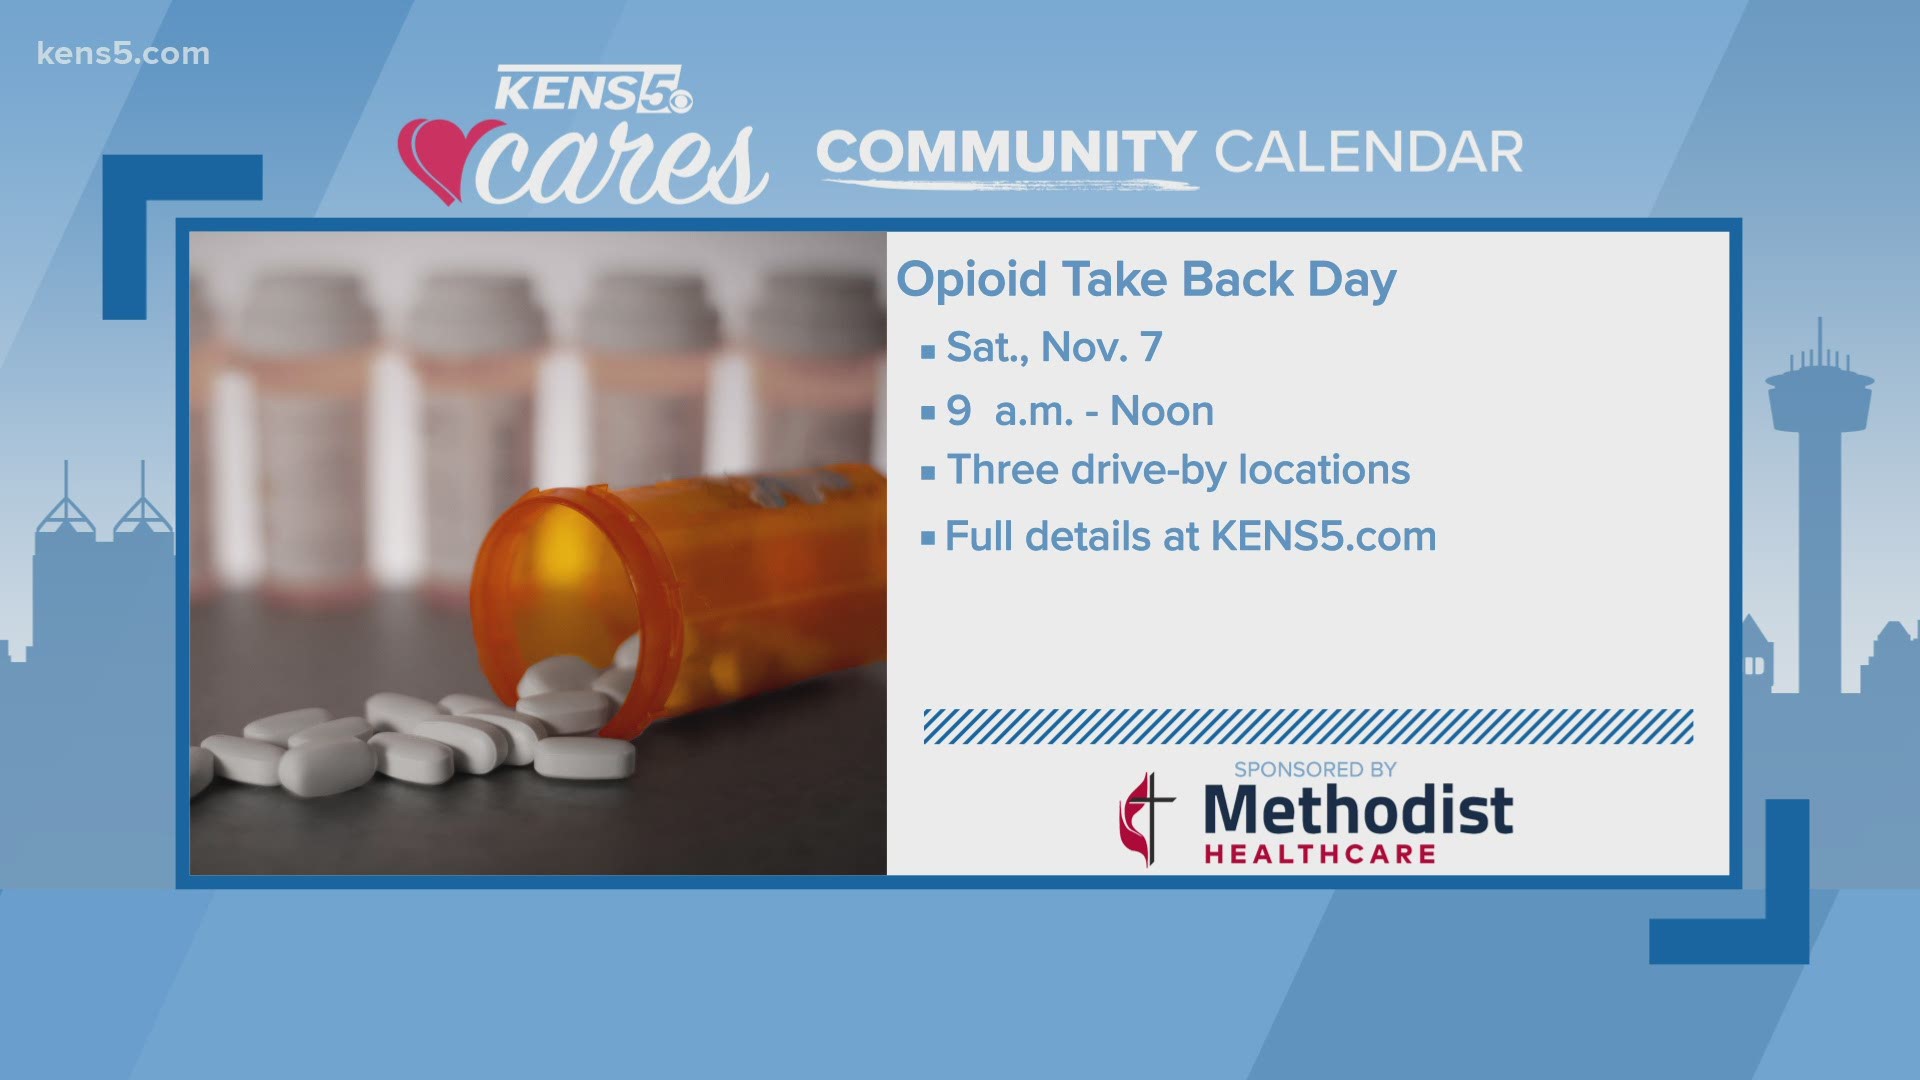 Safely get rid of your unused or expired medications tomorrow on 'Opioid Take Back Day.'